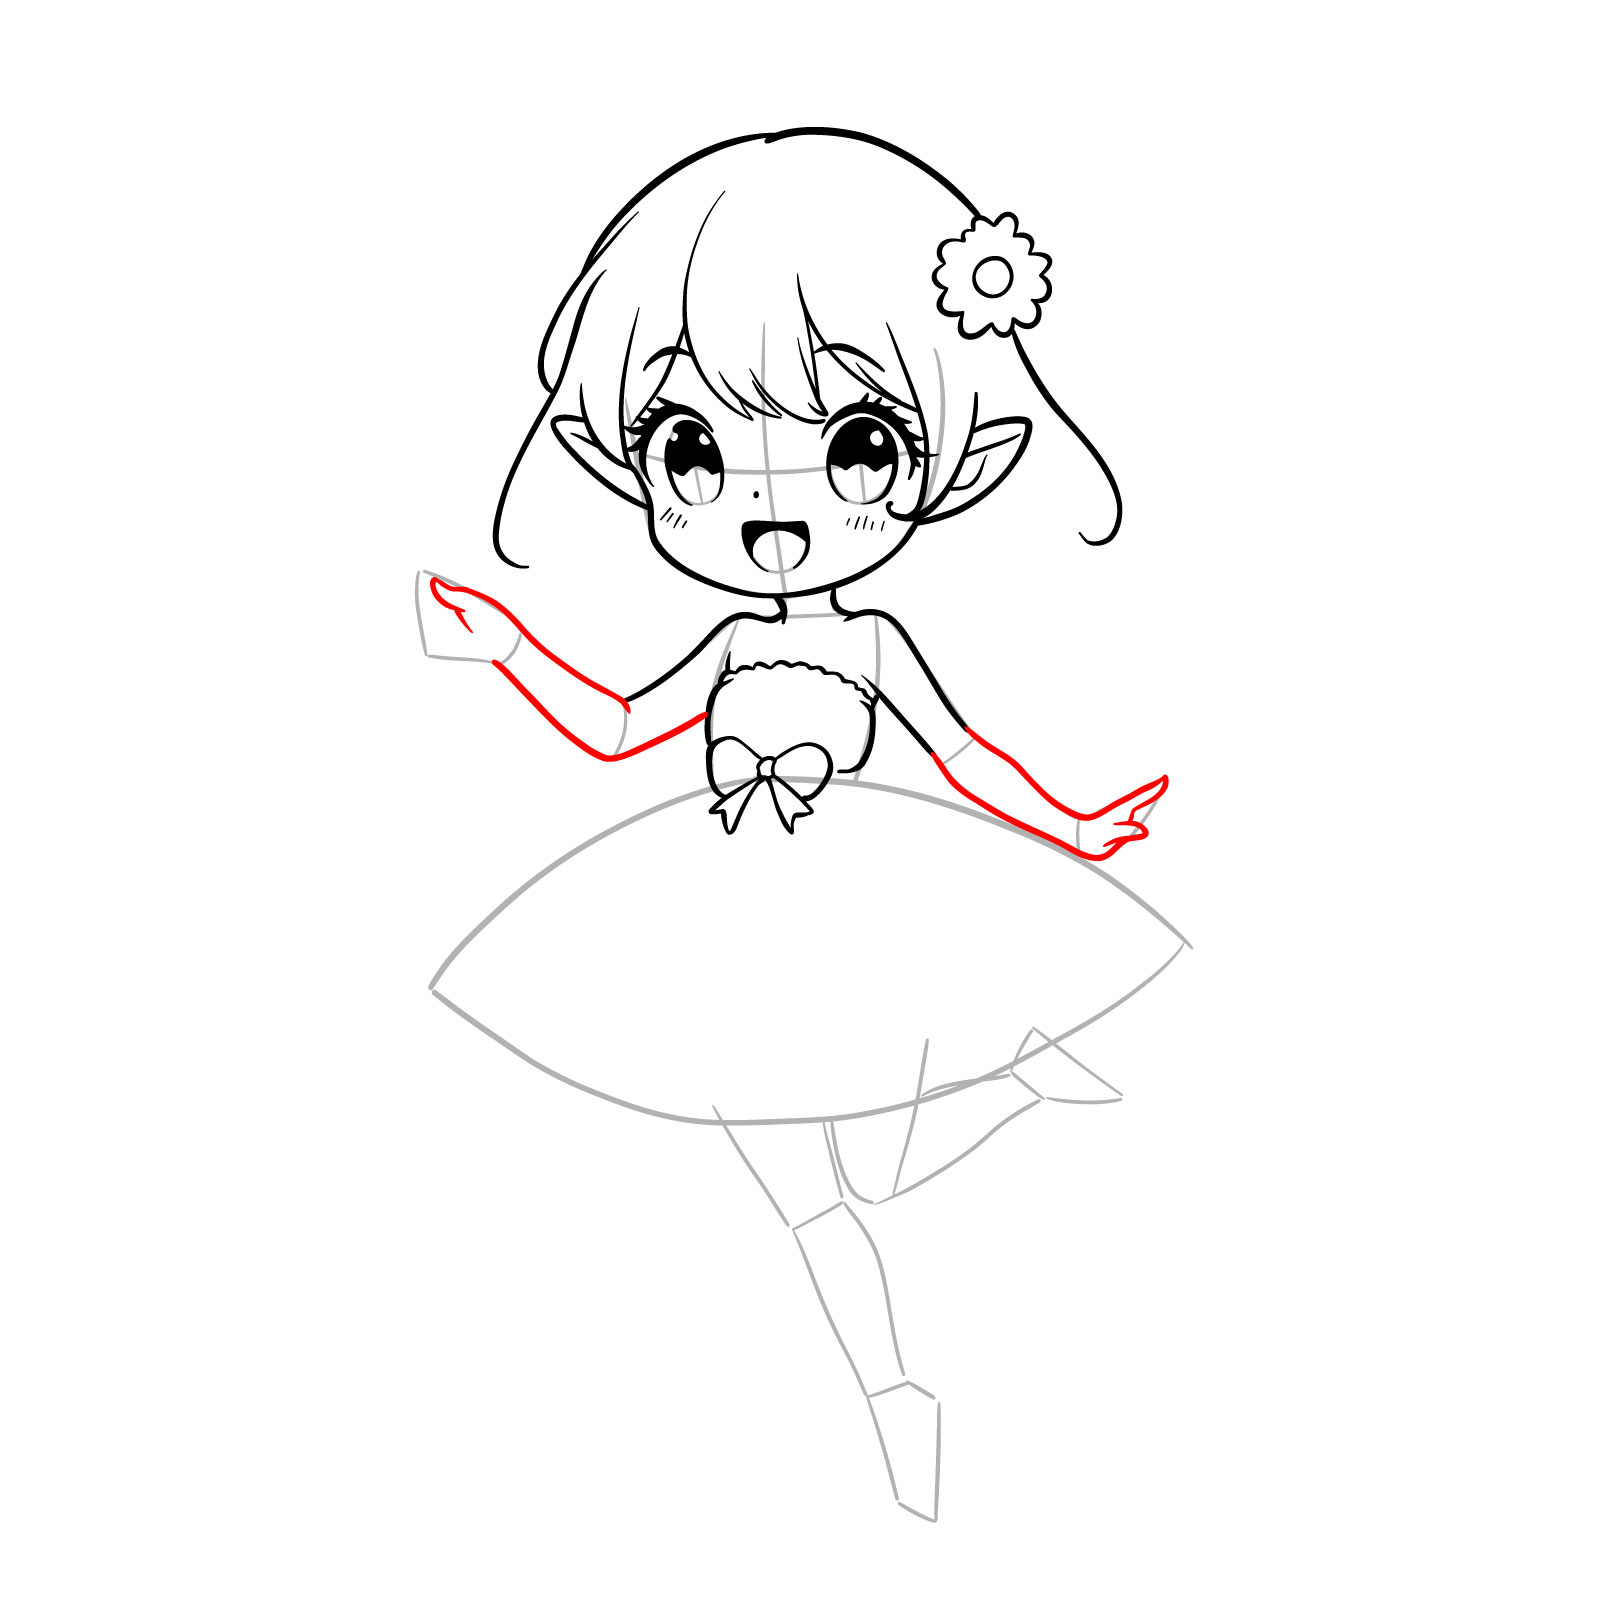 Drawing of an anime fairy with arms sketched out - step 11